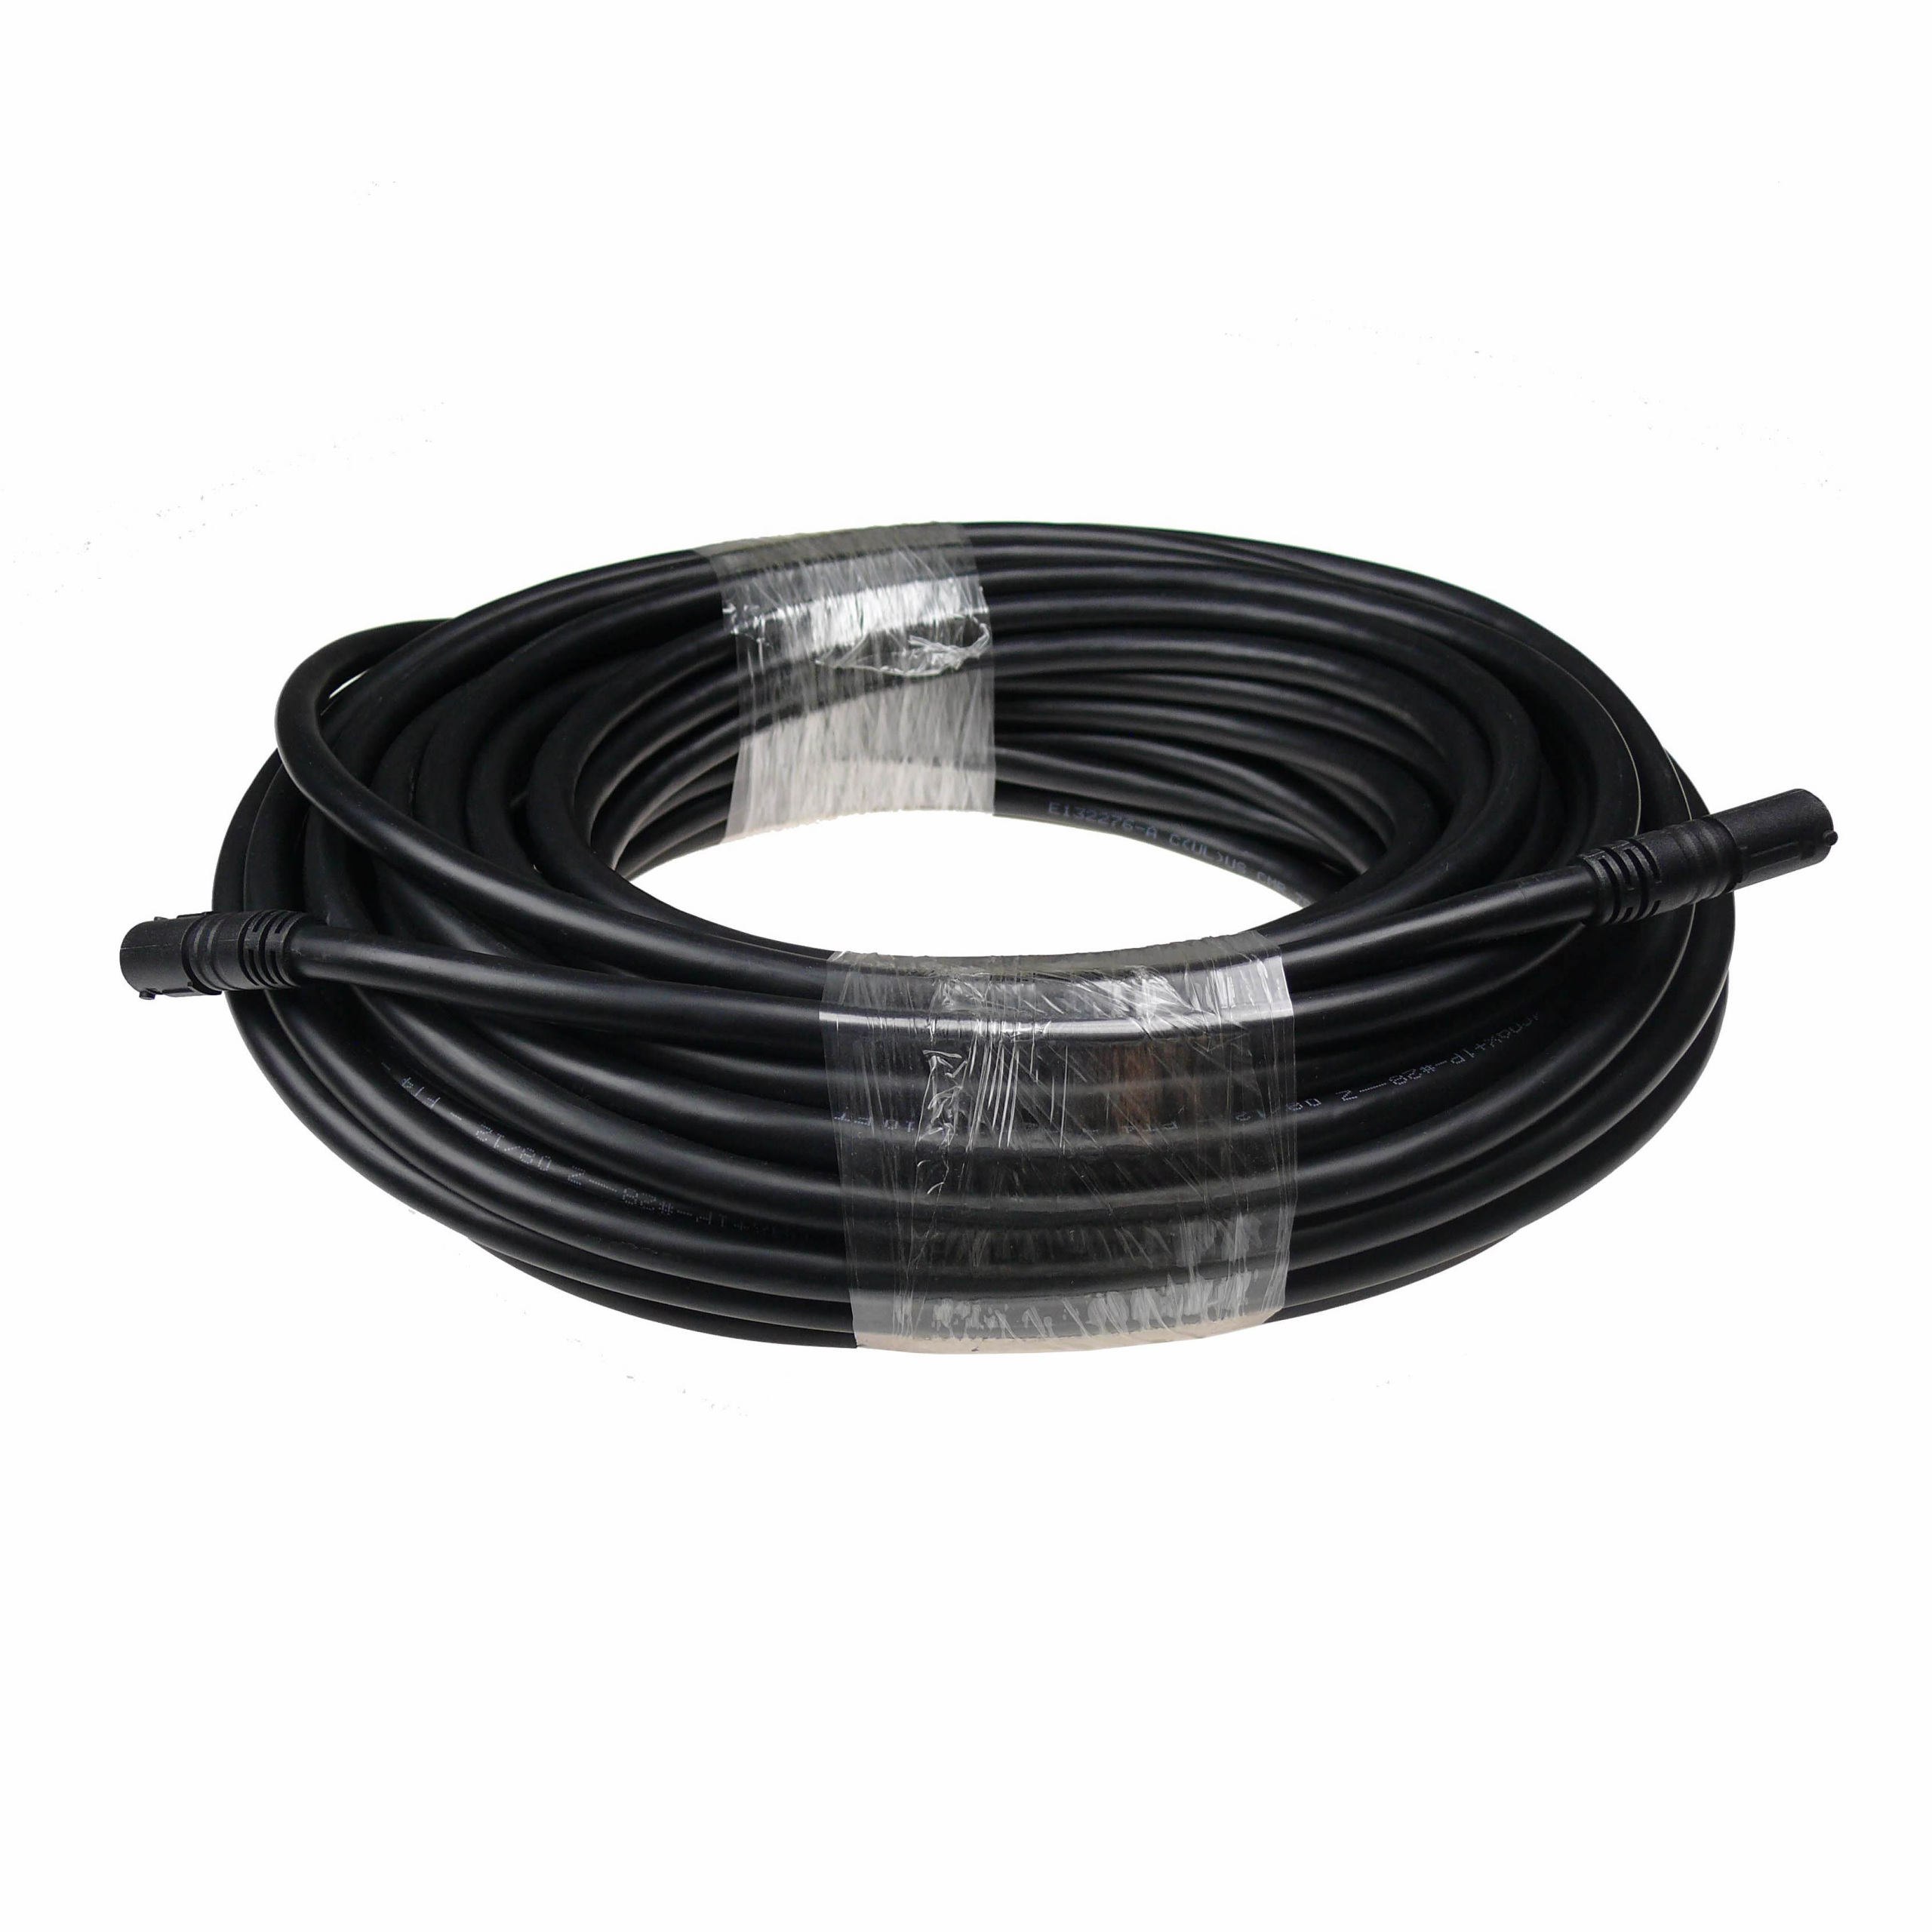 NTW 75FT TwistLock Runner Cable - Super Slim 0.6 - CM Rated - Patented  Quick Easy Twist, Lock, and Connect Design 